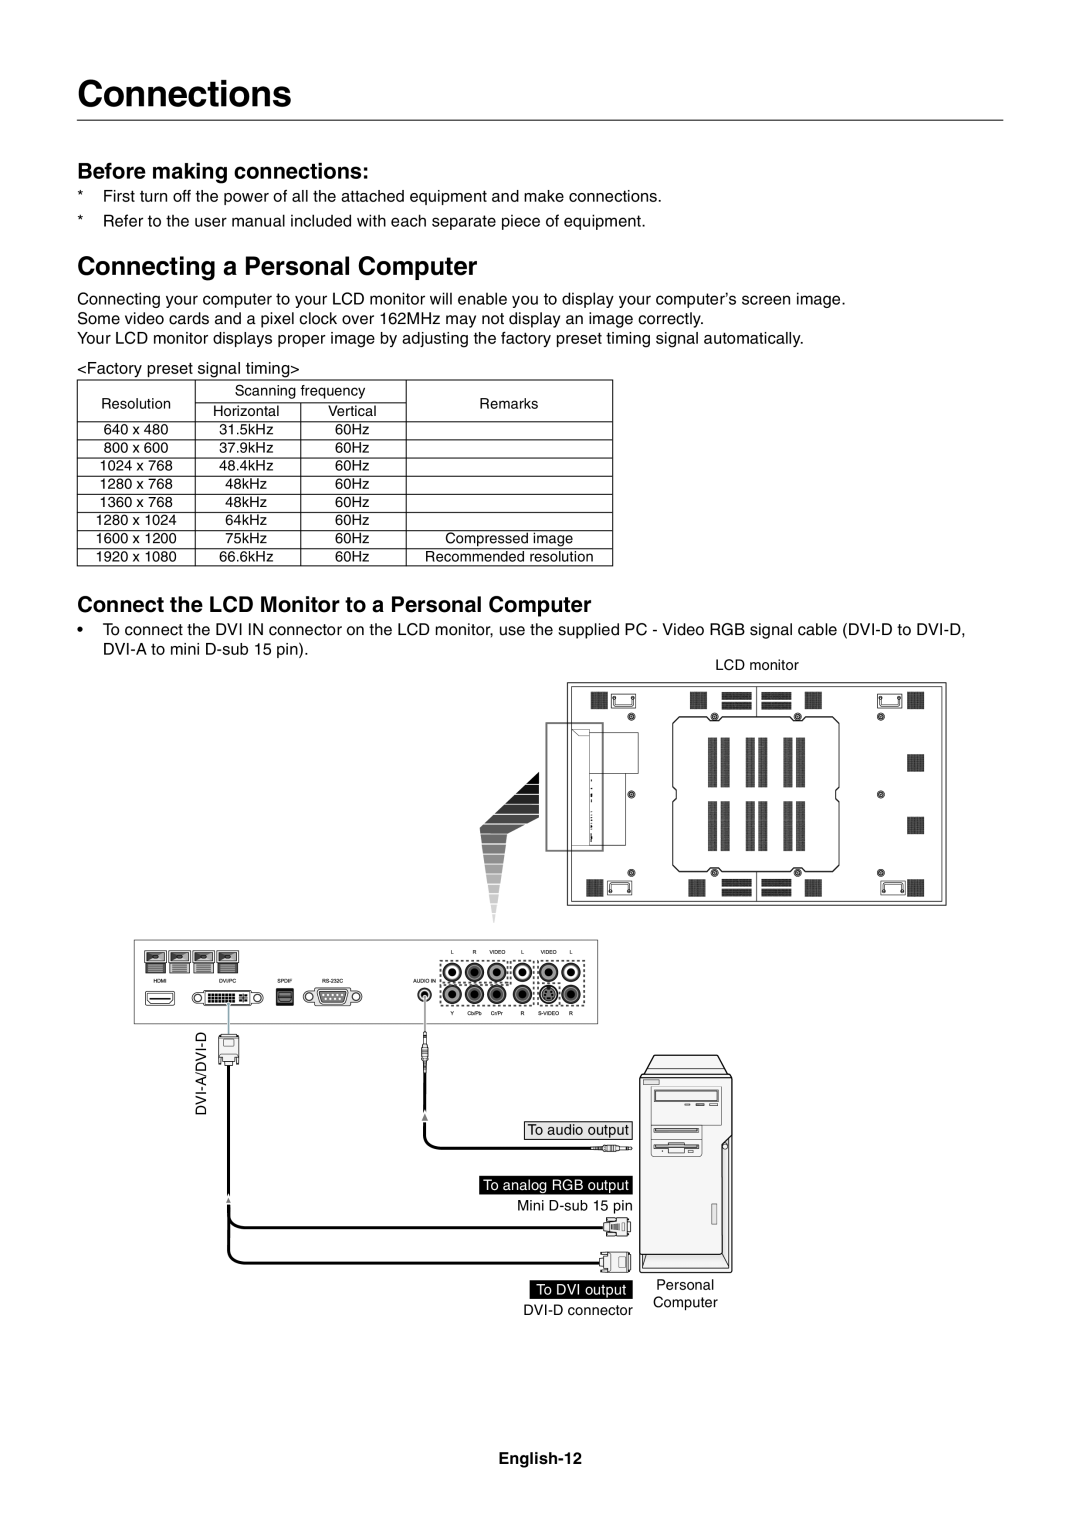 NEC LCD8205-P user manual Connections, Connecting a Personal Computer, Before making connections 